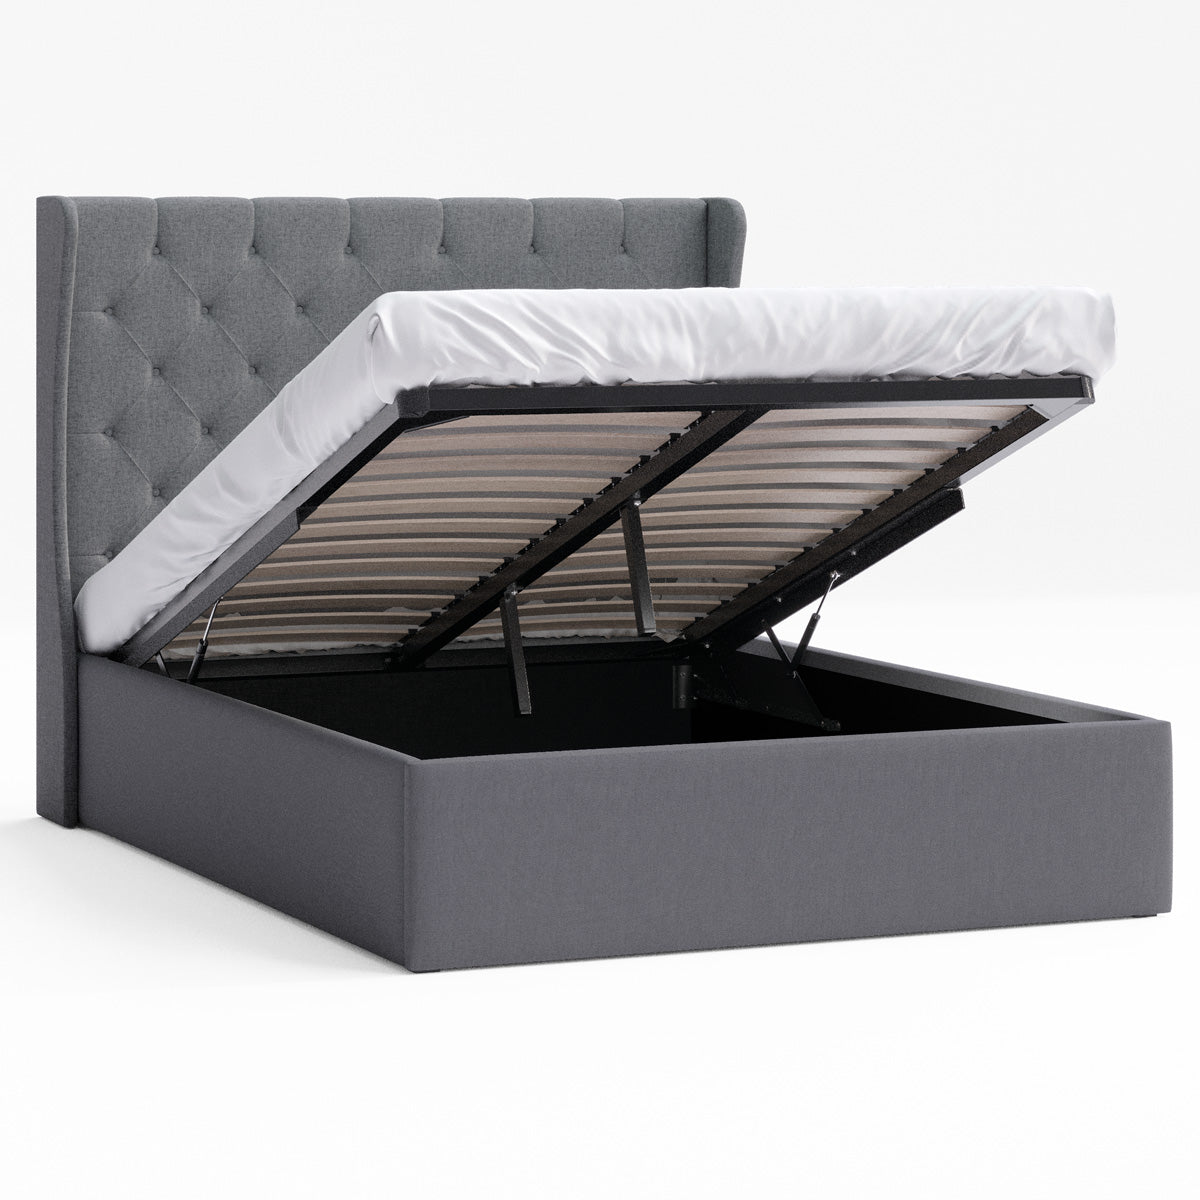 Windsor Gas Lift Storage Wing Bed Frame (Charcoal Fabric)